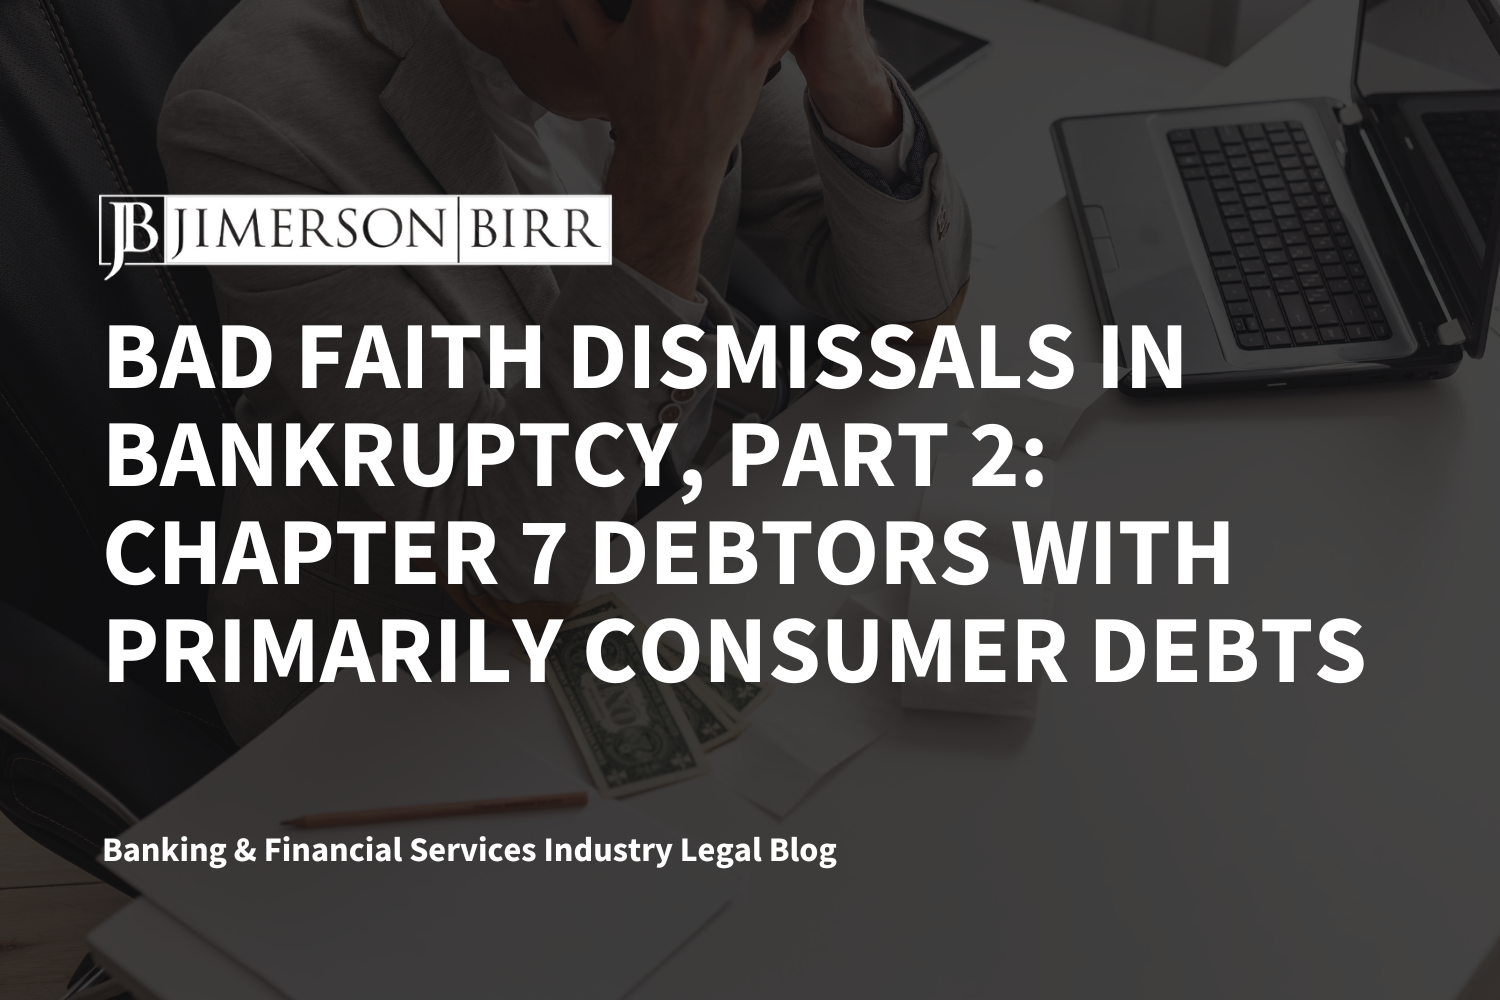 Bad Faith Dismissals in Bankruptcy, Part 2: Chapter 7 Debtors with Primarily Consumer Debts